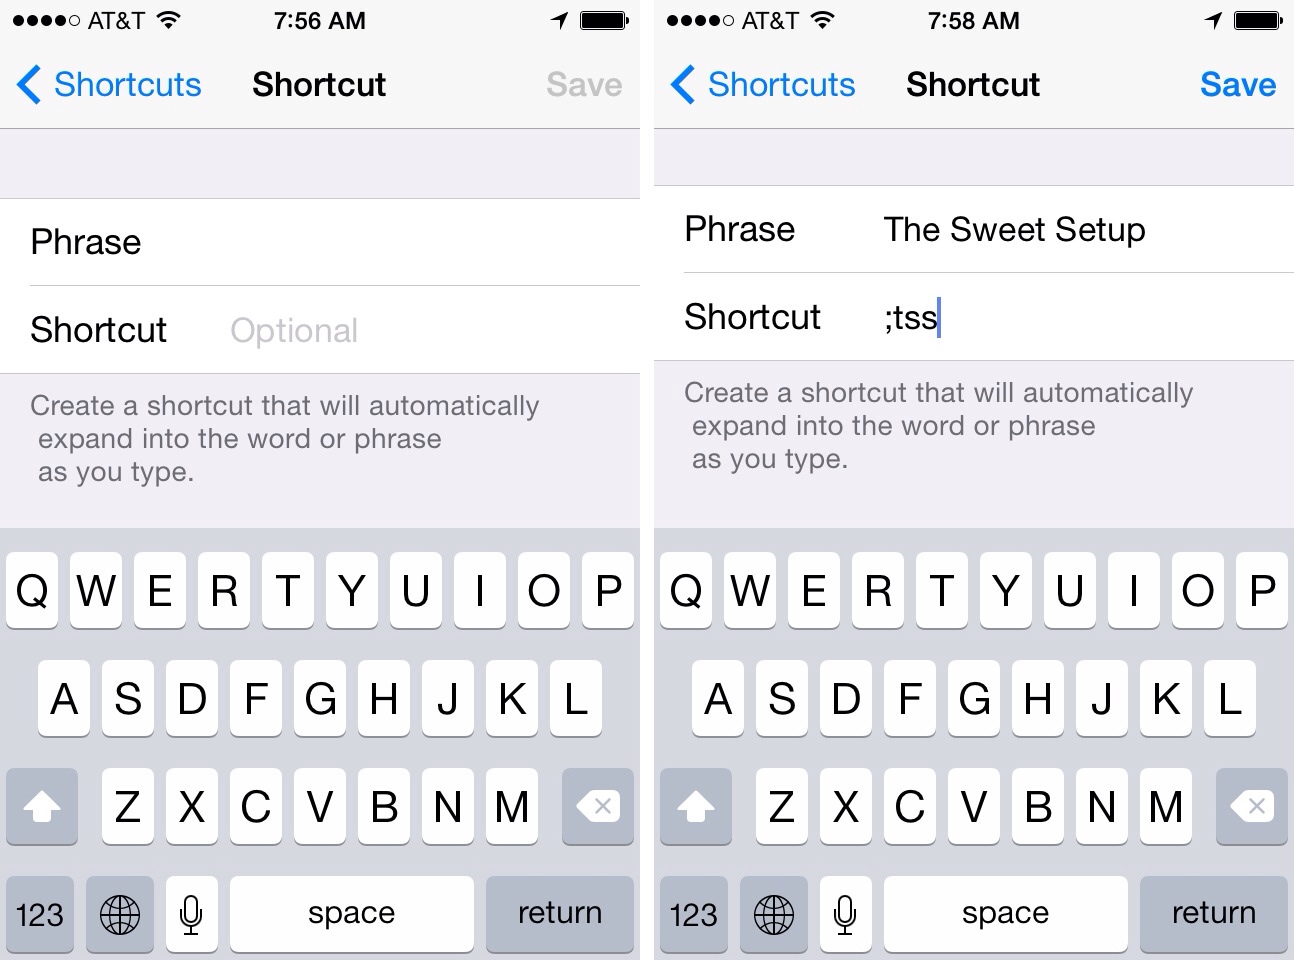 Quick Tip: Use iOS keyboard shortcuts to save time – The Sweet Setup